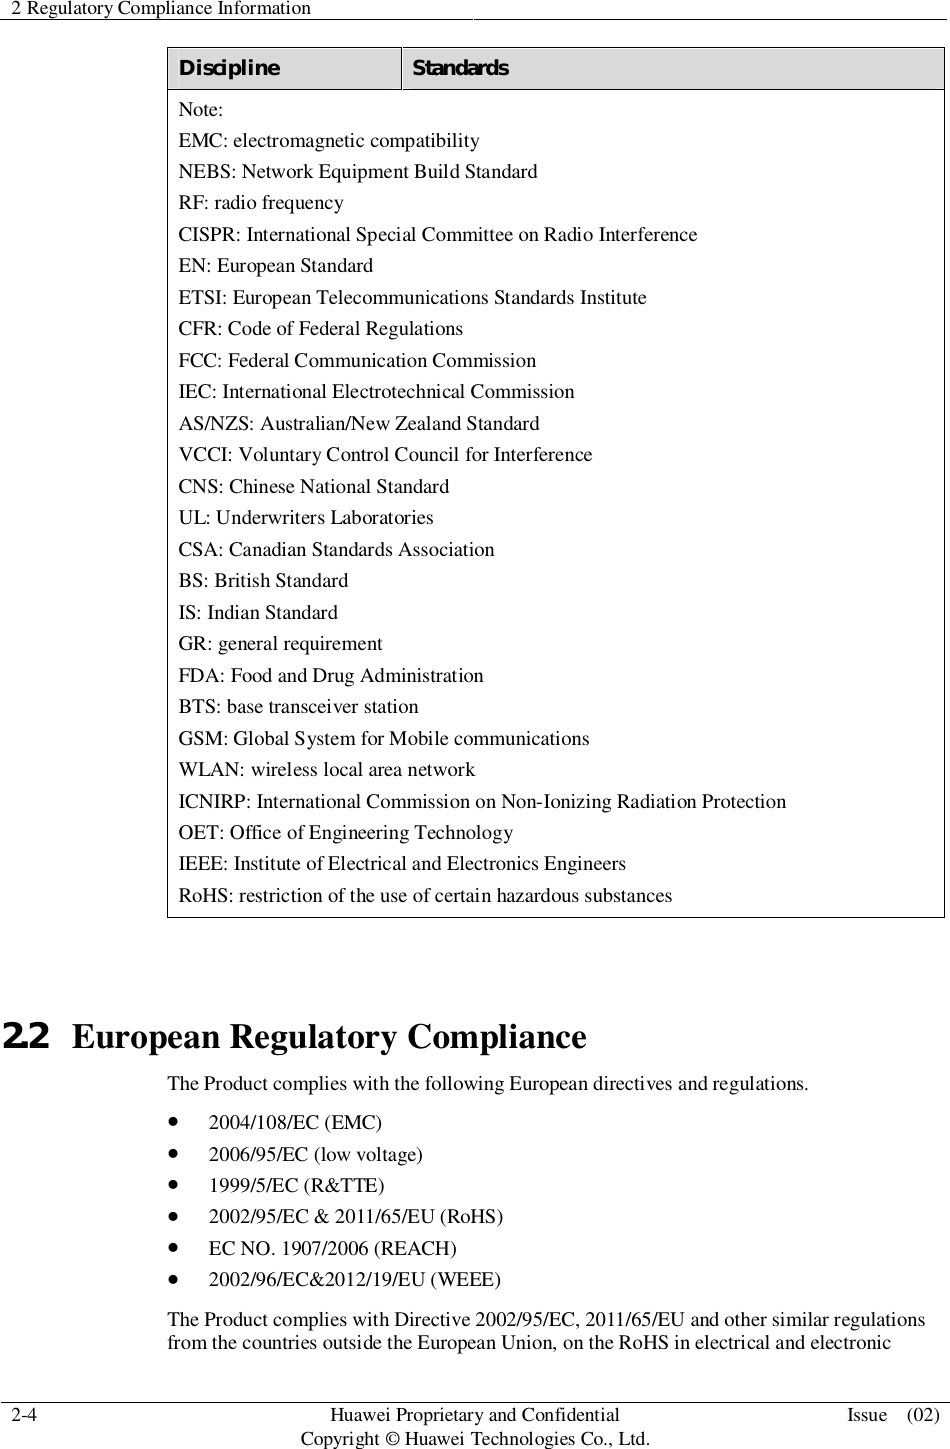 2 Regulatory Compliance Information2-4 HuaweiProprietary and ConfidentialCopyright © Huawei Technologies Co., Ltd. Issue  (02)Discipline StandardsNote:EMC: electromagnetic compatibilityNEBS: Network Equipment Build StandardRF: radio frequencyCISPR: International Special Committee on Radio InterferenceEN: European StandardETSI: European Telecommunications Standards InstituteCFR: Code of Federal RegulationsFCC: Federal Communication CommissionIEC: International Electrotechnical CommissionAS/NZS: Australian/New Zealand StandardVCCI: Voluntary Control Council for InterferenceCNS: Chinese National StandardUL: Underwriters LaboratoriesCSA: Canadian Standards AssociationBS: British StandardIS: Indian StandardGR: general requirementFDA: Food and Drug AdministrationBTS: base transceiver stationGSM: Global System for Mobile communicationsWLAN: wireless local area networkICNIRP: International Commission on Non-Ionizing Radiation ProtectionOET: Office of Engineering TechnologyIEEE: Institute of Electrical and Electronics EngineersRoHS: restriction of the use of certain hazardous substances2.2  European Regulatory ComplianceThe Product complies with the following European directives and regulations.2004/108/EC (EMC)2006/95/EC (low voltage)1999/5/EC (R&amp;TTE)2002/95/EC &amp; 2011/65/EU (RoHS)EC NO. 1907/2006 (REACH)2002/96/EC&amp;2012/19/EU (WEEE)The Product complies with Directive 2002/95/EC, 2011/65/EU and other similar regulationsfrom the countries outside the European Union, on the RoHS in electrical and electronic